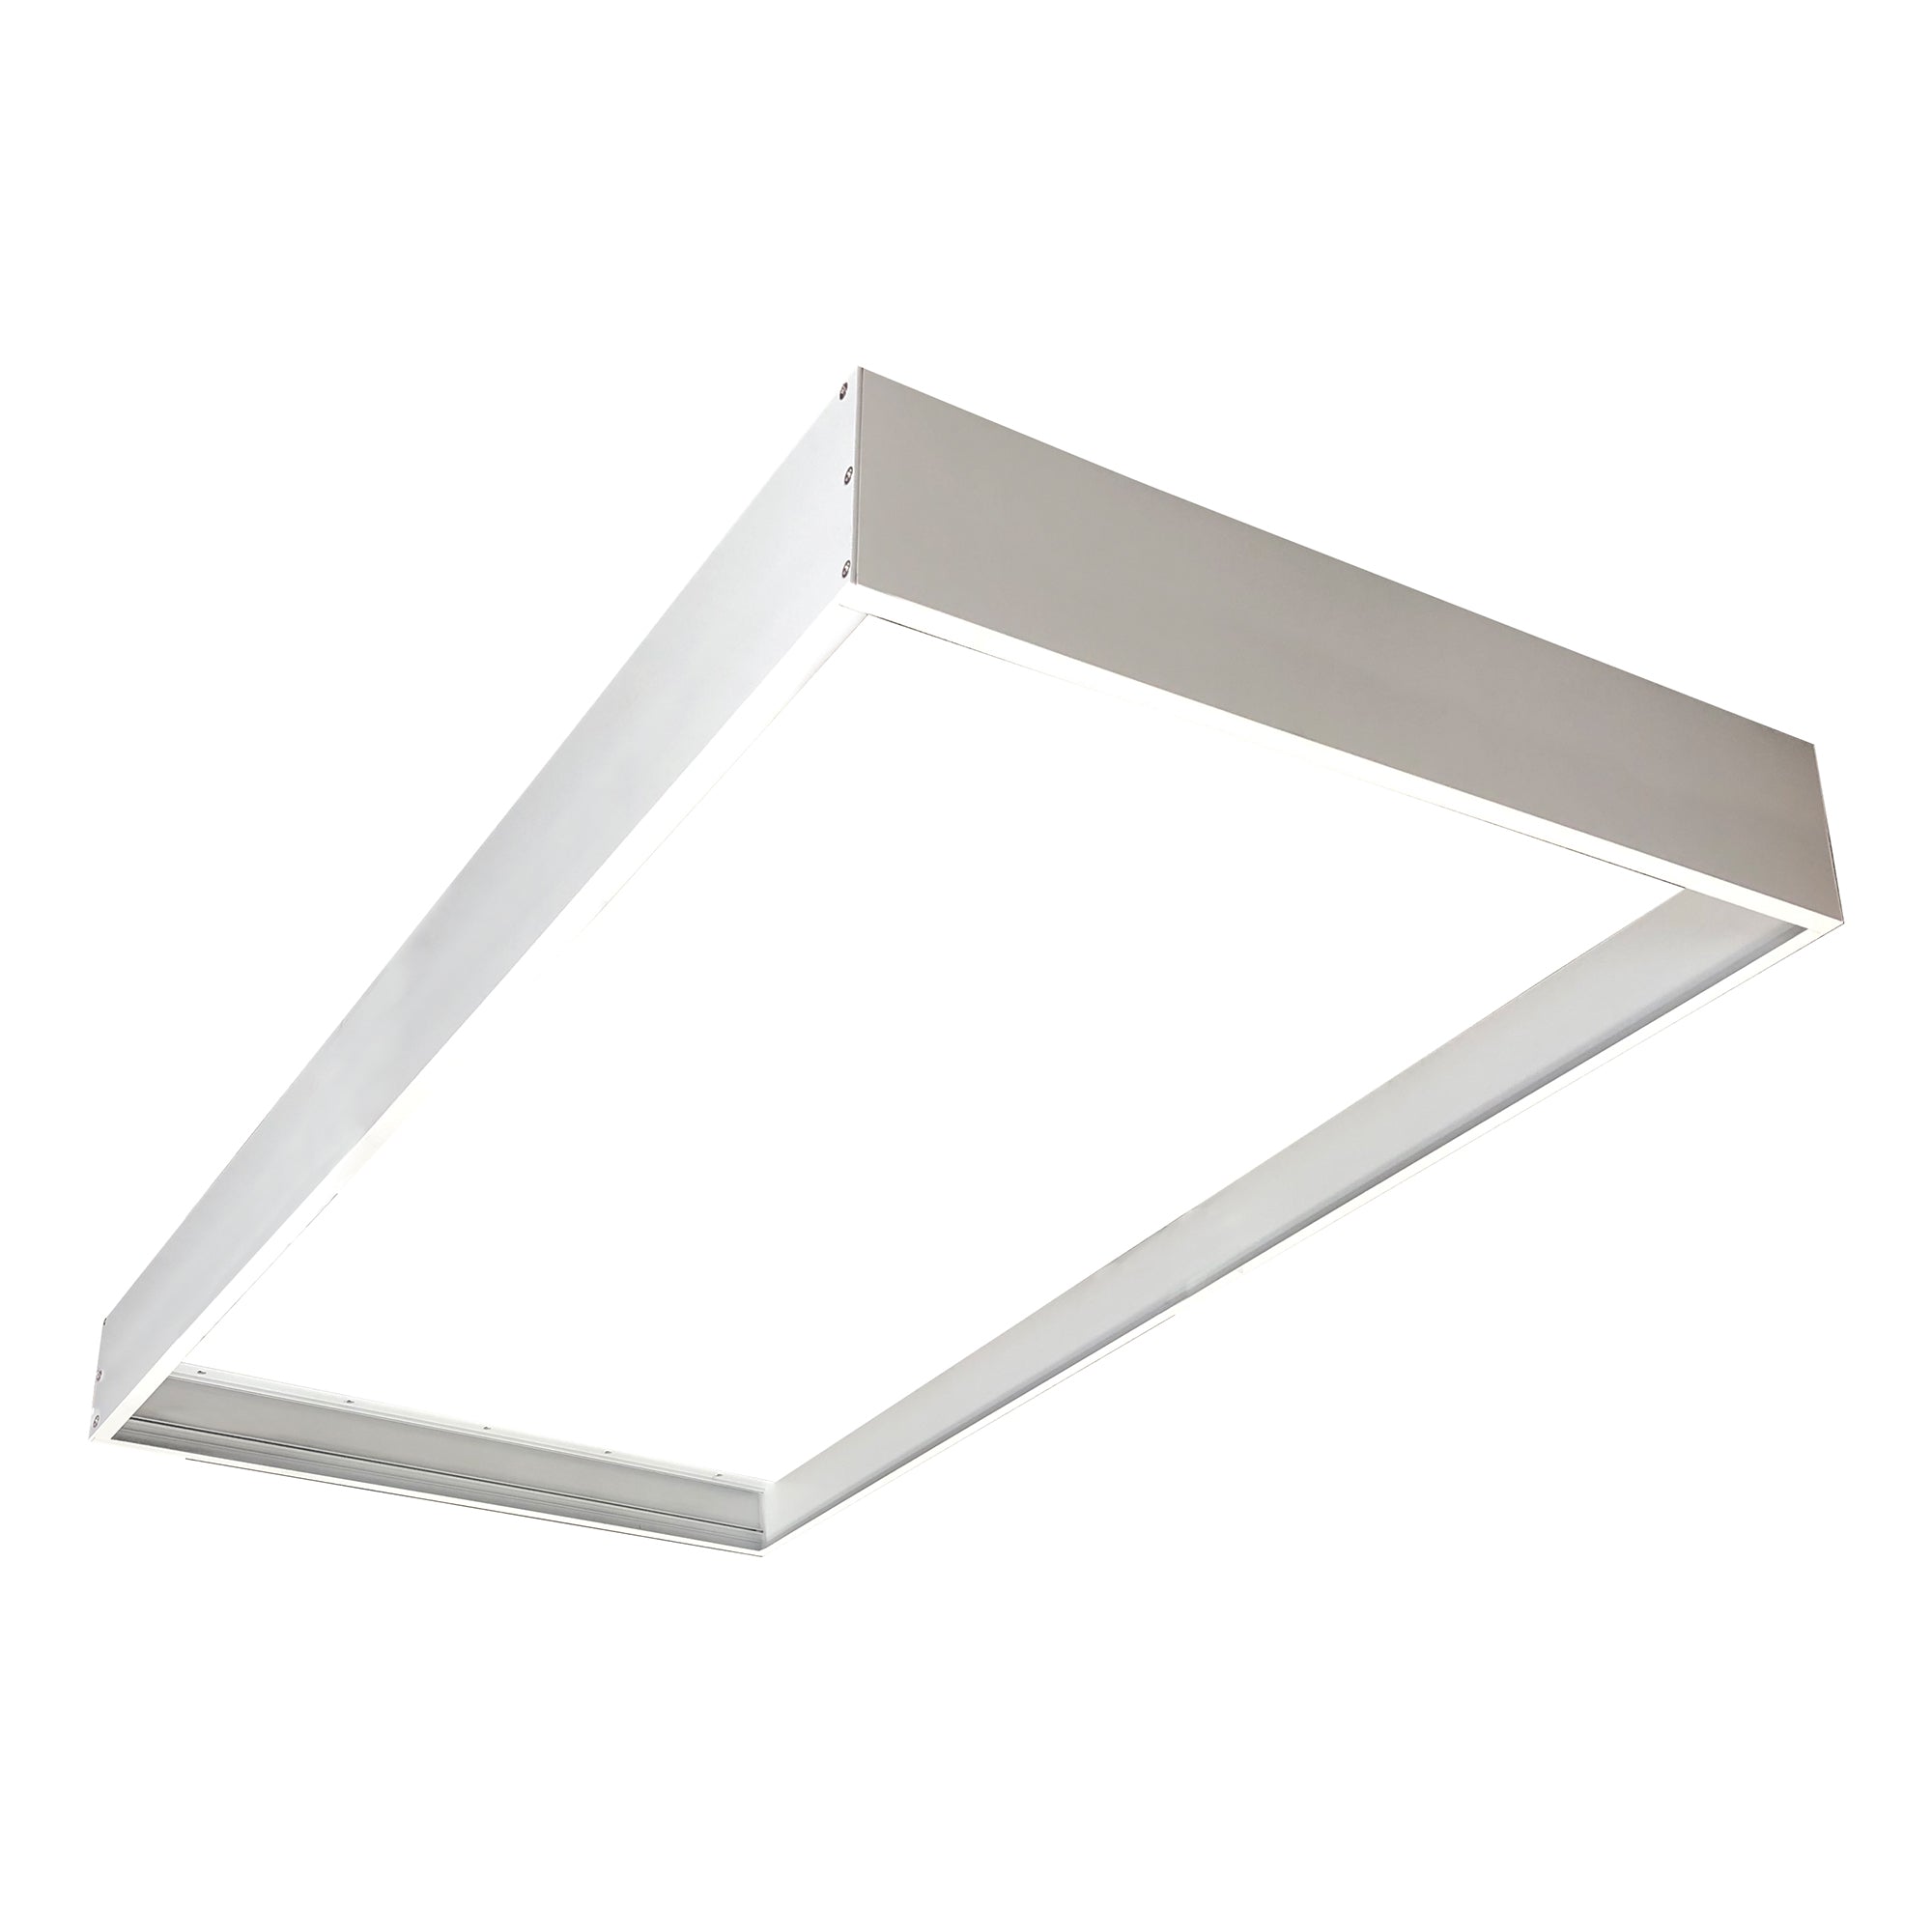 Nora Lighting NPDBL-24DDFK/W - Recessed - Surface Mounting Frame for 2'x4' LED Backlit Panels with Emergency